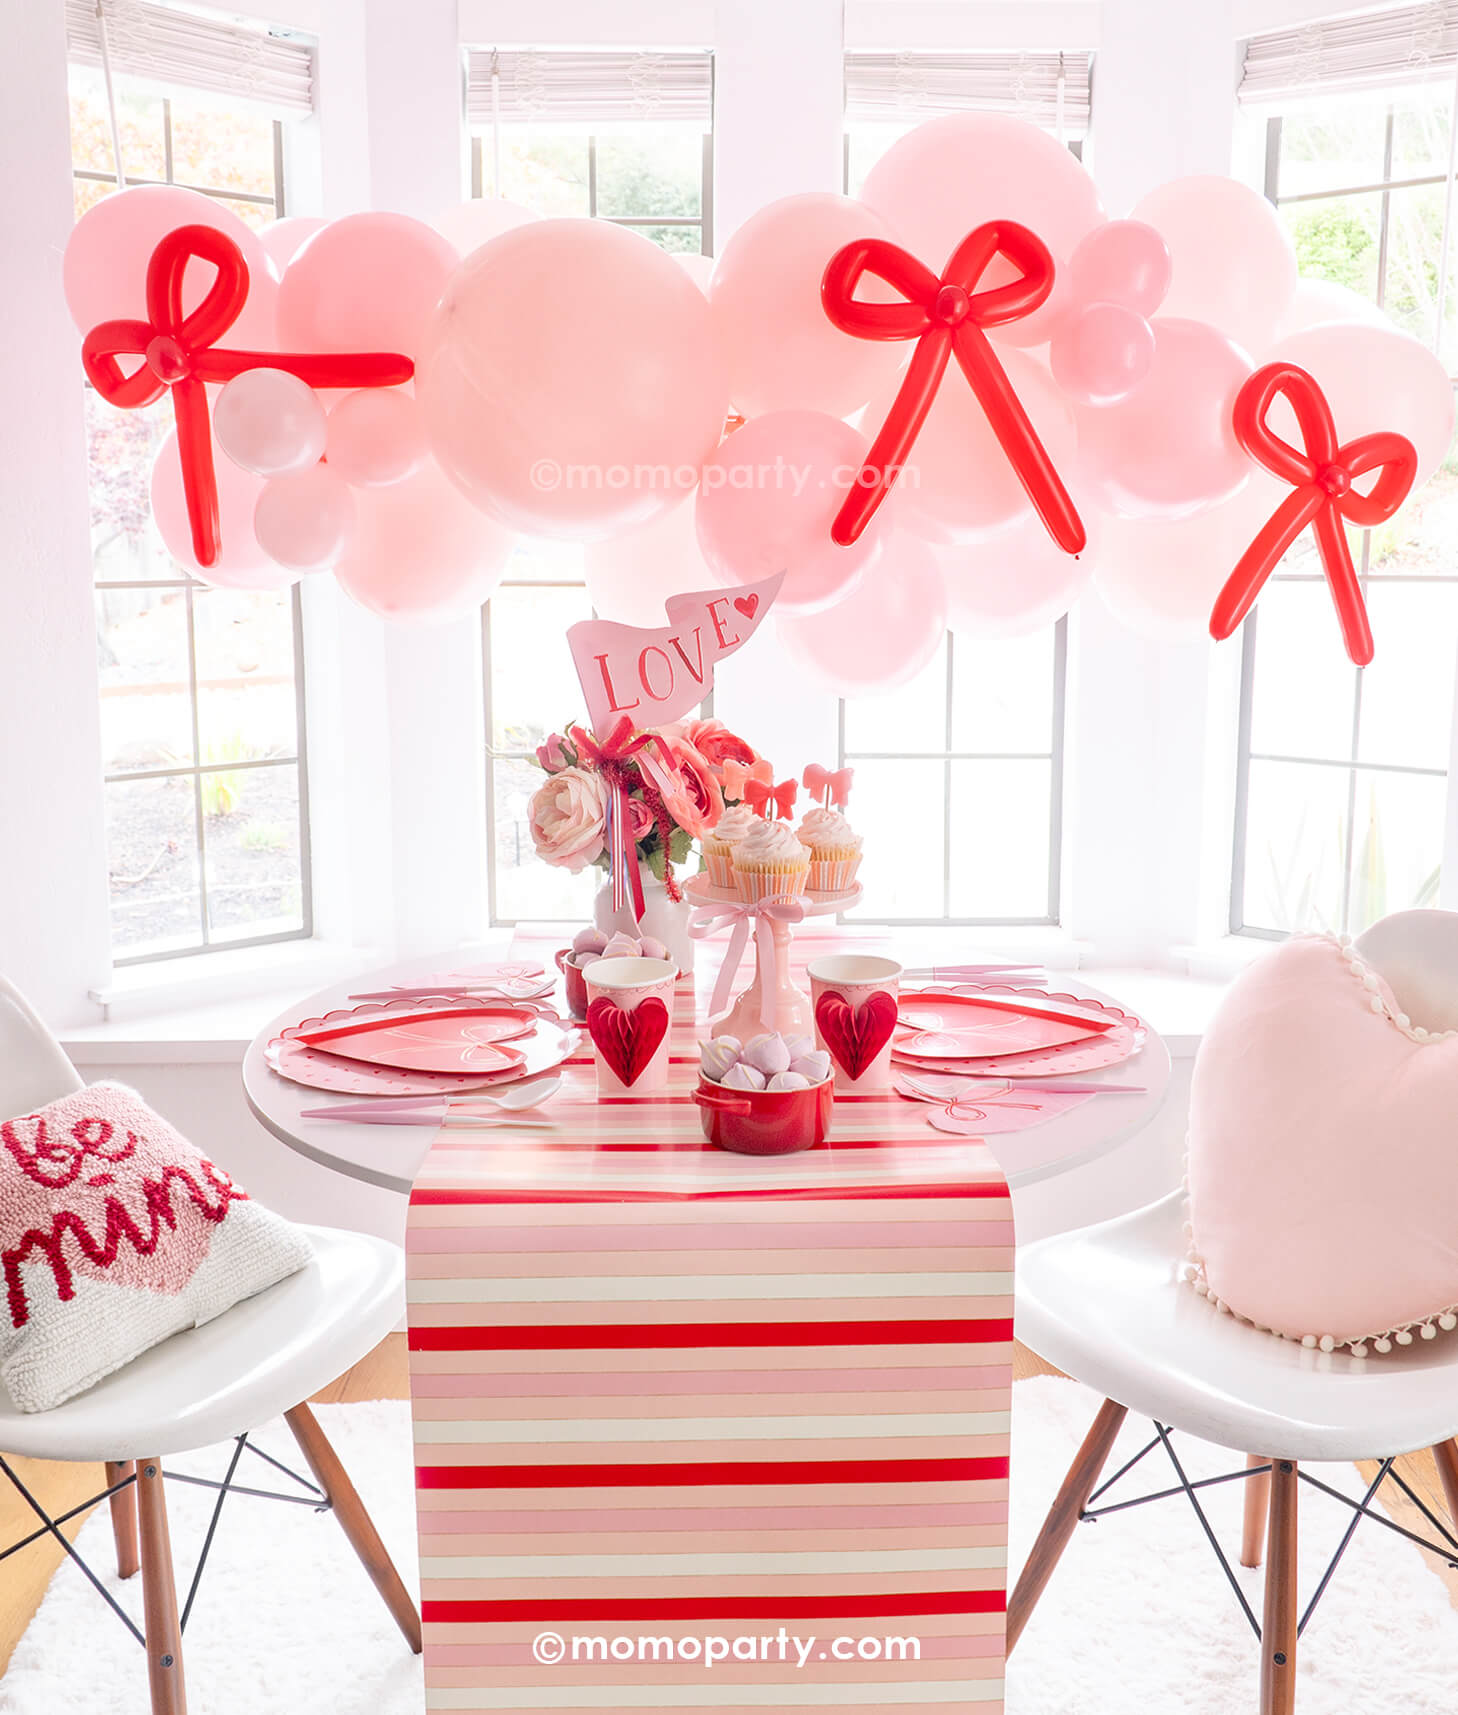 A beautiful party set up next to a big, bright window featuring Momo Party's Bow-tiful Valentine's Day Party Box for 8 guests. Featuring a pink balloon garland with red bow balloons on it, heart shaped tableware including plates, napkins and party cups, and a beautiful flower bouquet with a pink "LOVE" party pennant, this adorable party box in classic Valentine's colors of red and pink is perfect for your Valentine's Day party or Galentine's Day celebration.